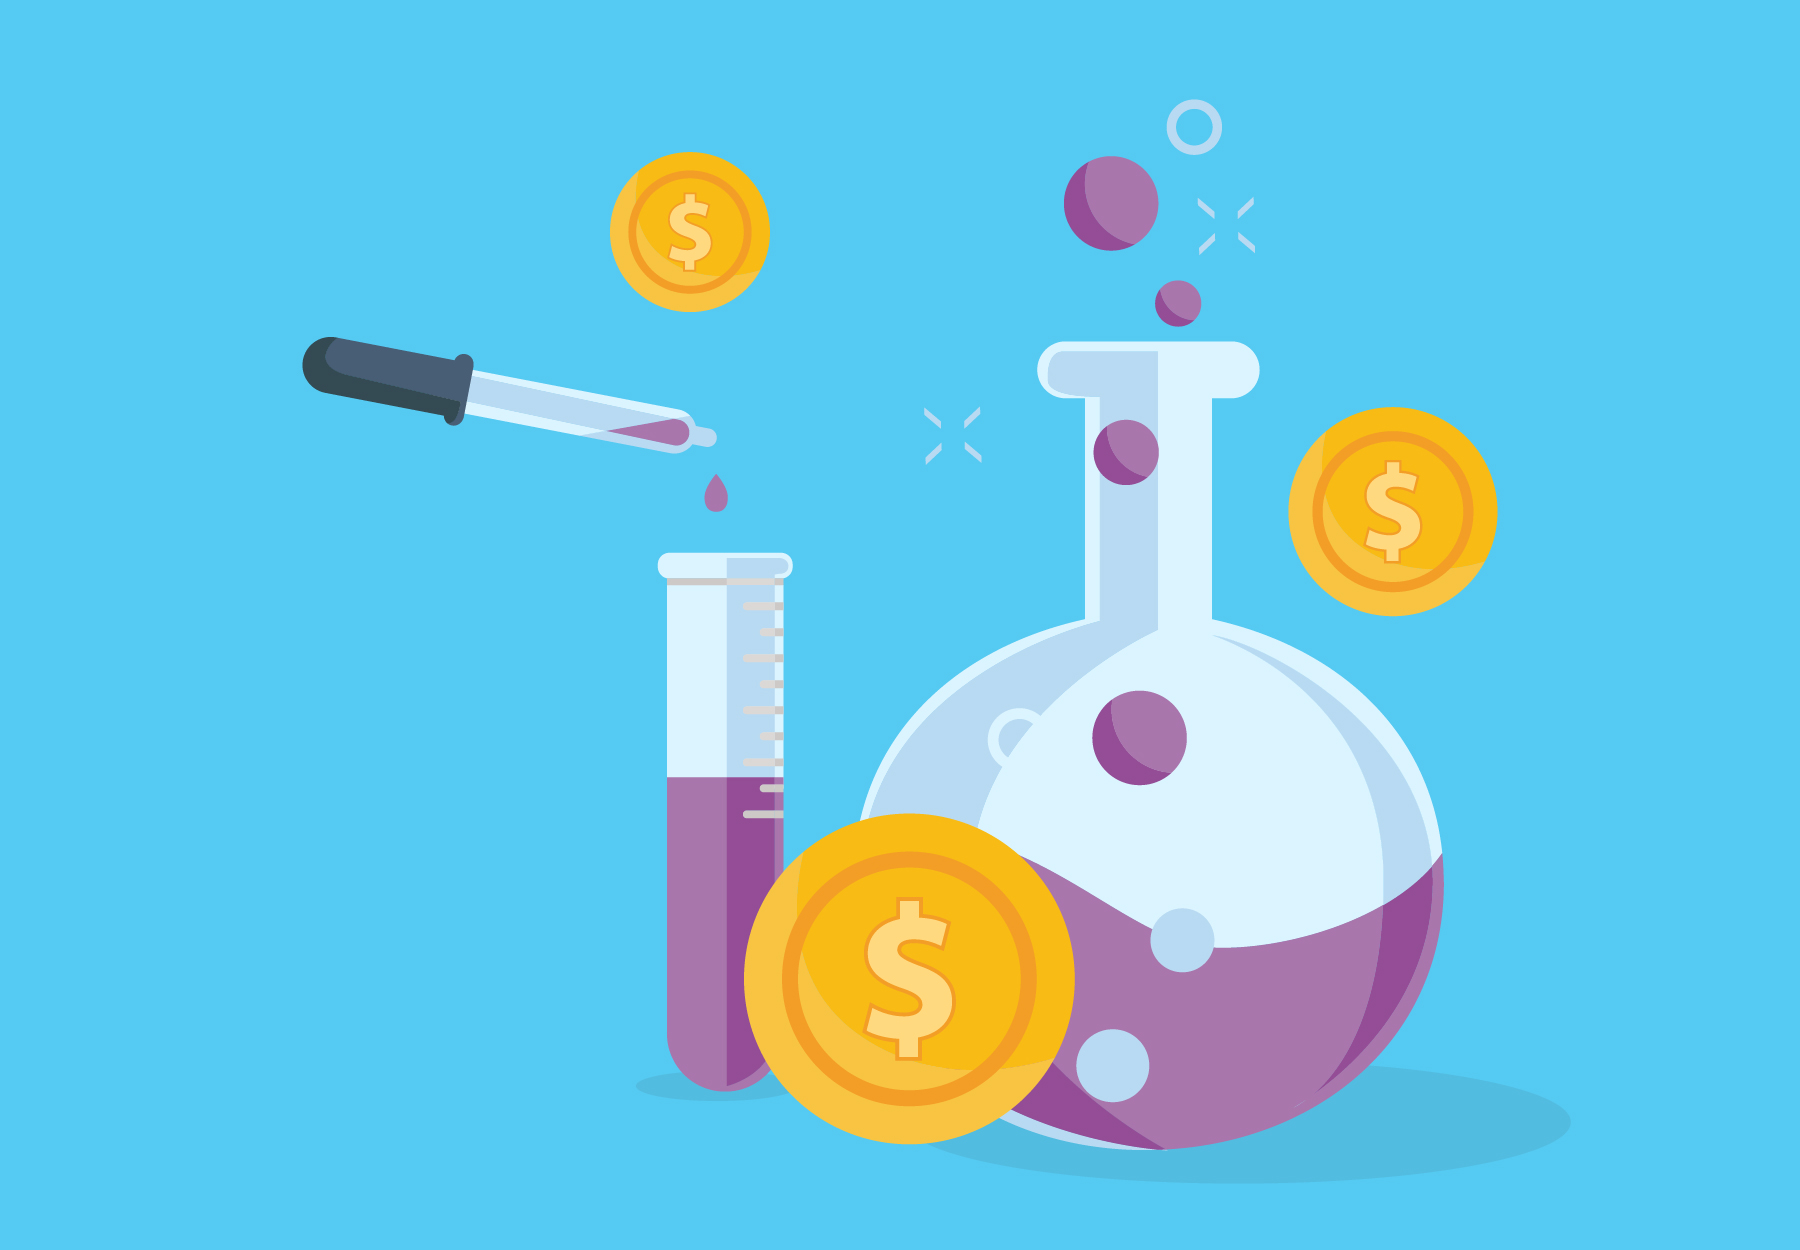 An illustration of a test tube with a pipette and beaker, both filled with purple liquid, surrounded by gold coins to show the concept of laboratory test pricing.